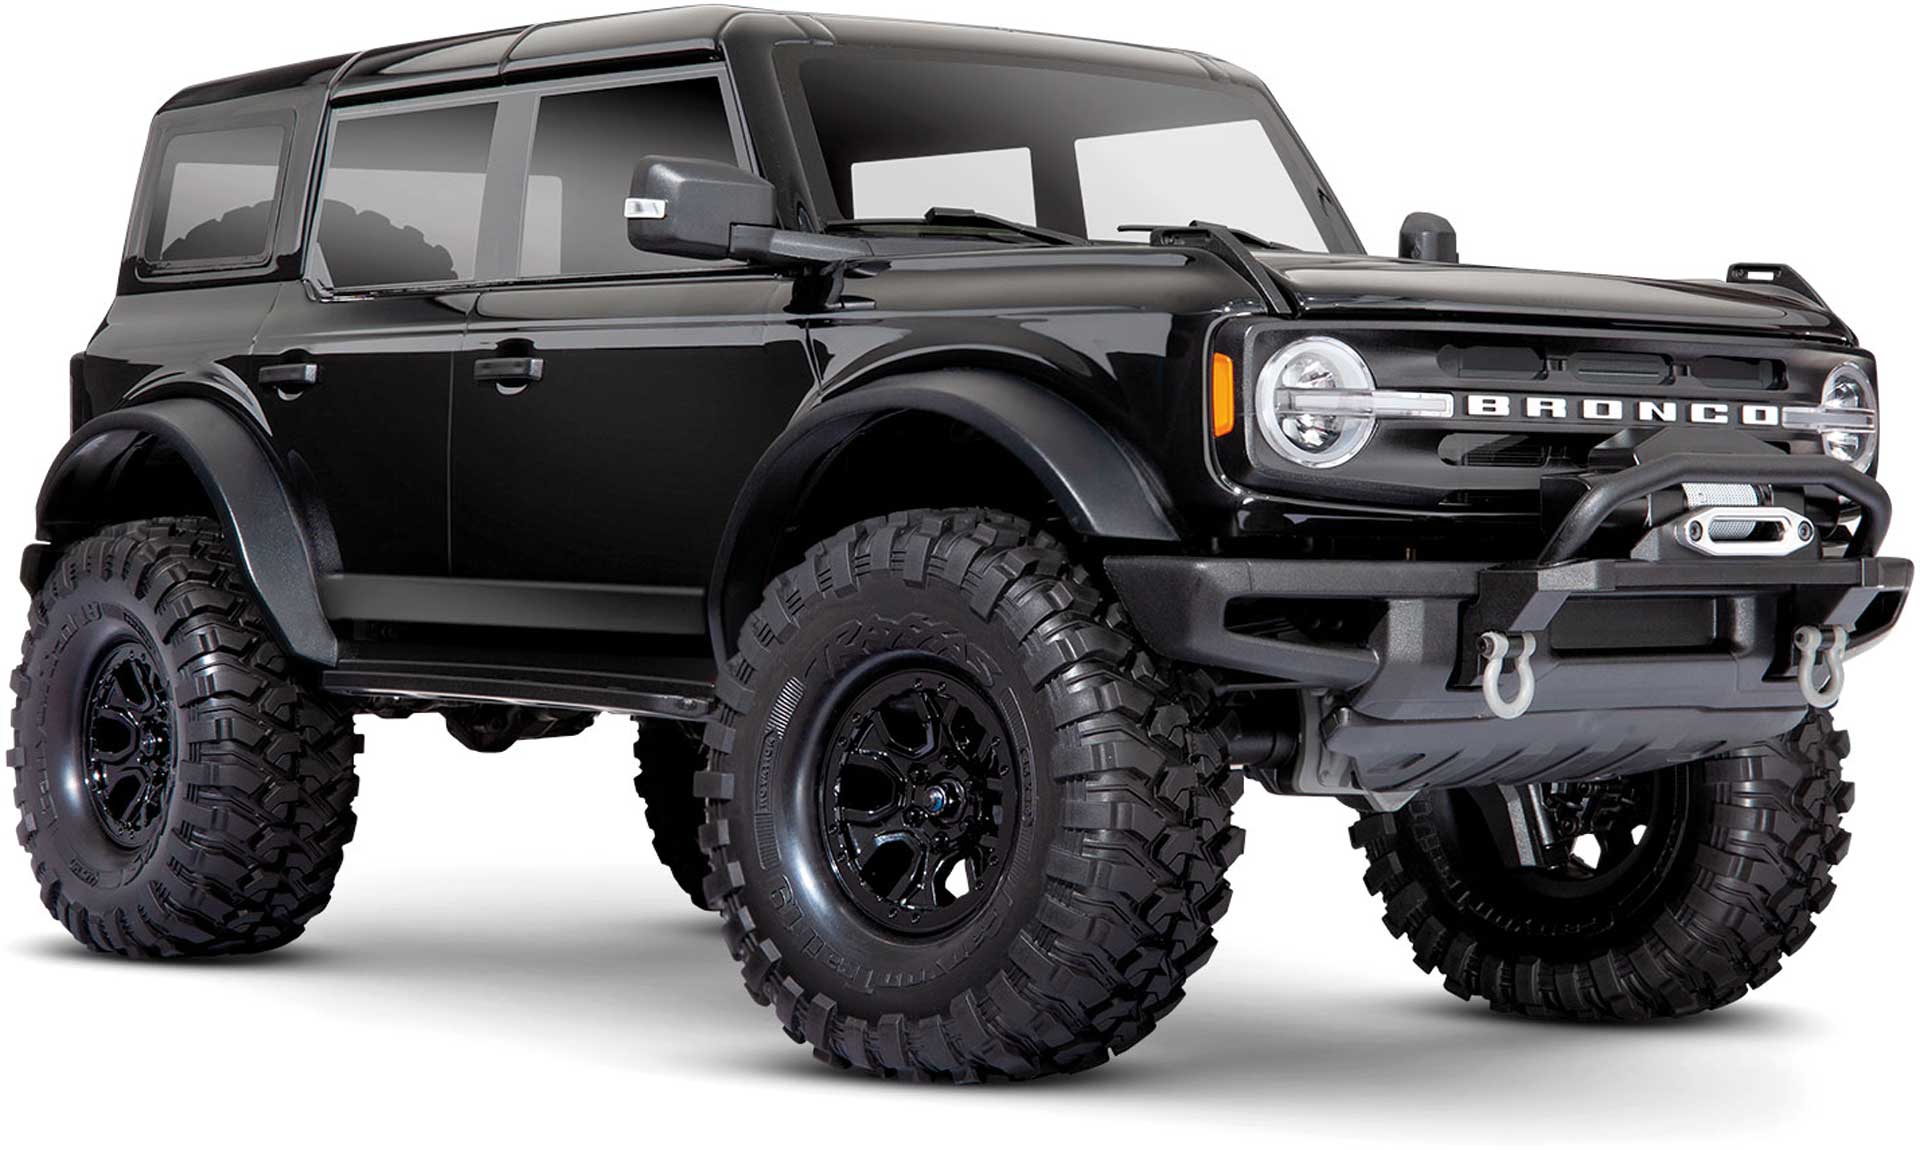 TRAXXAS TRX-4 2021 FORD BRONCO BLACK RTR O. ACCU/CHARGER 1/10 4WD SCALE CRAWLER BRUSHED incl. free TRX winch *SVR*